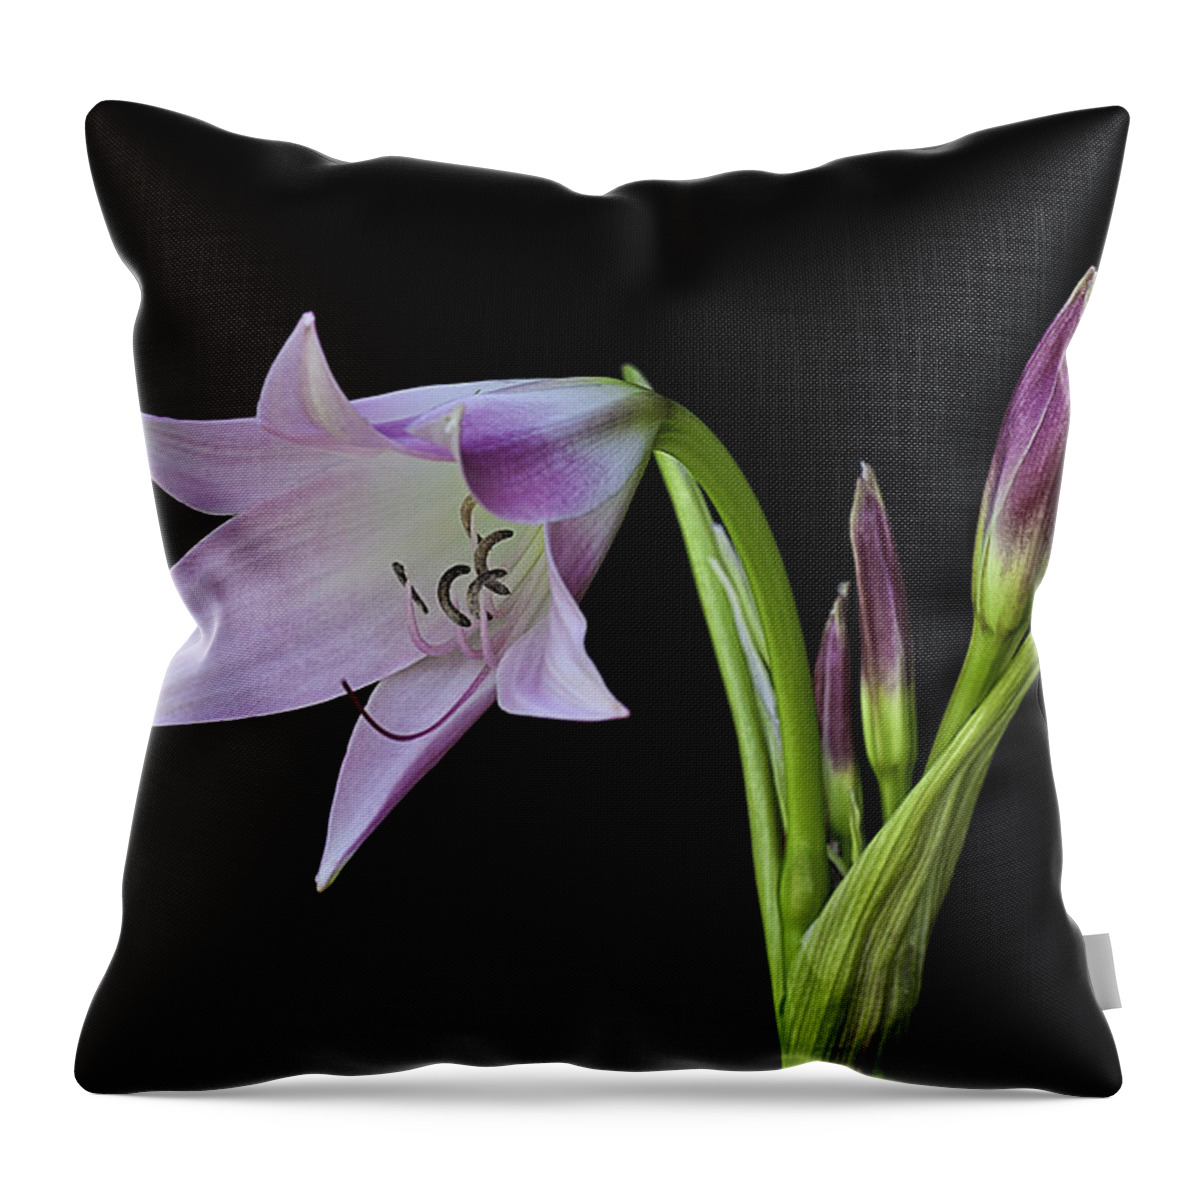 Pink Floyd Throw Pillow featuring the photograph Budding Lily by Ken Barrett